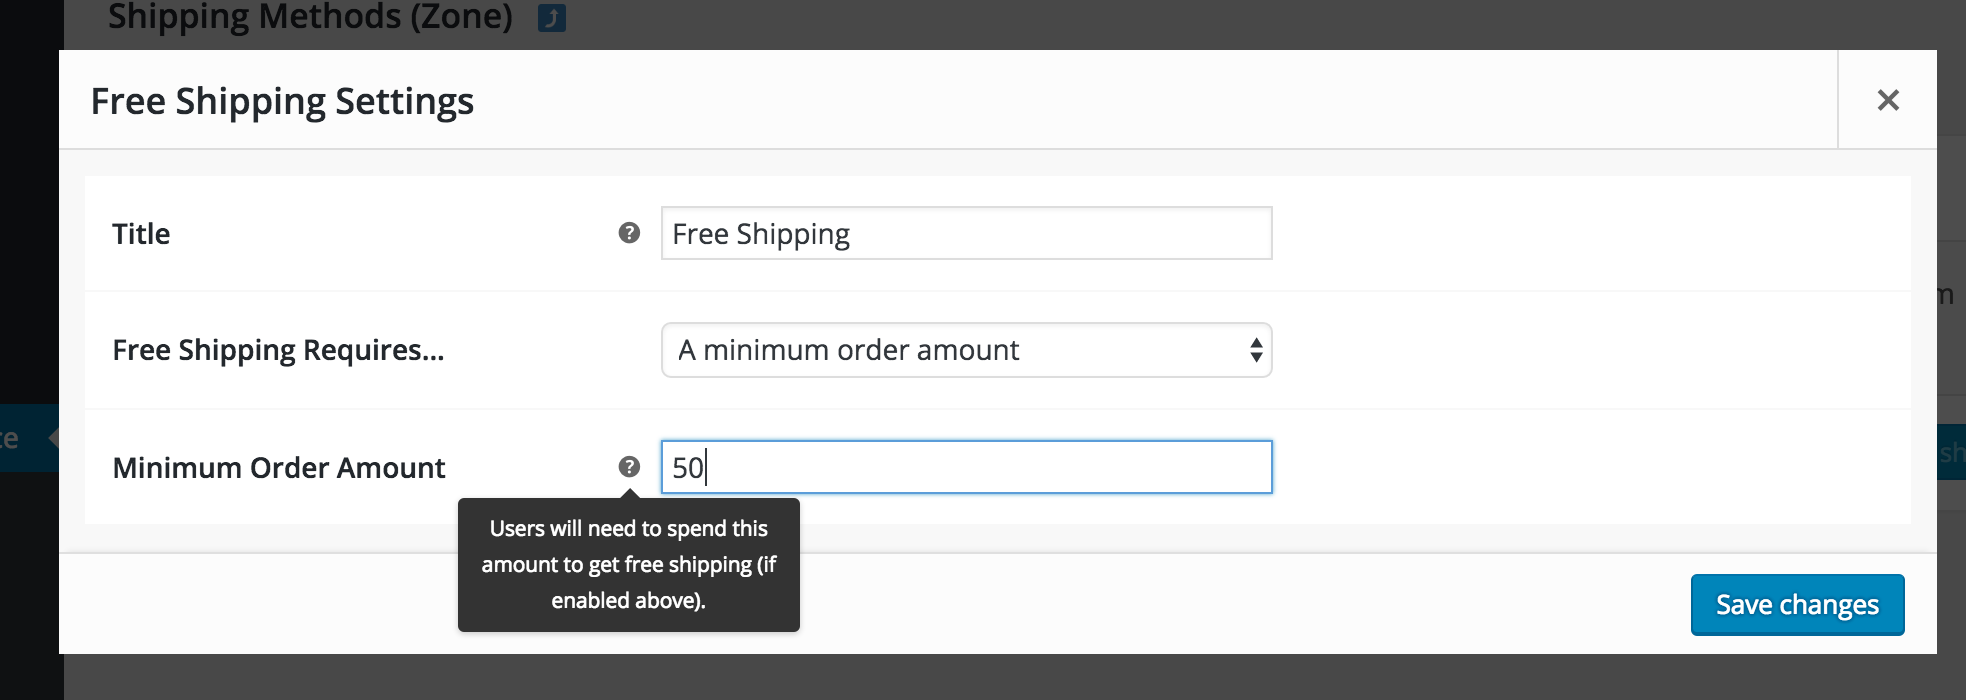 In this example free shipping if offered for United States customers if they spend $50 or more.